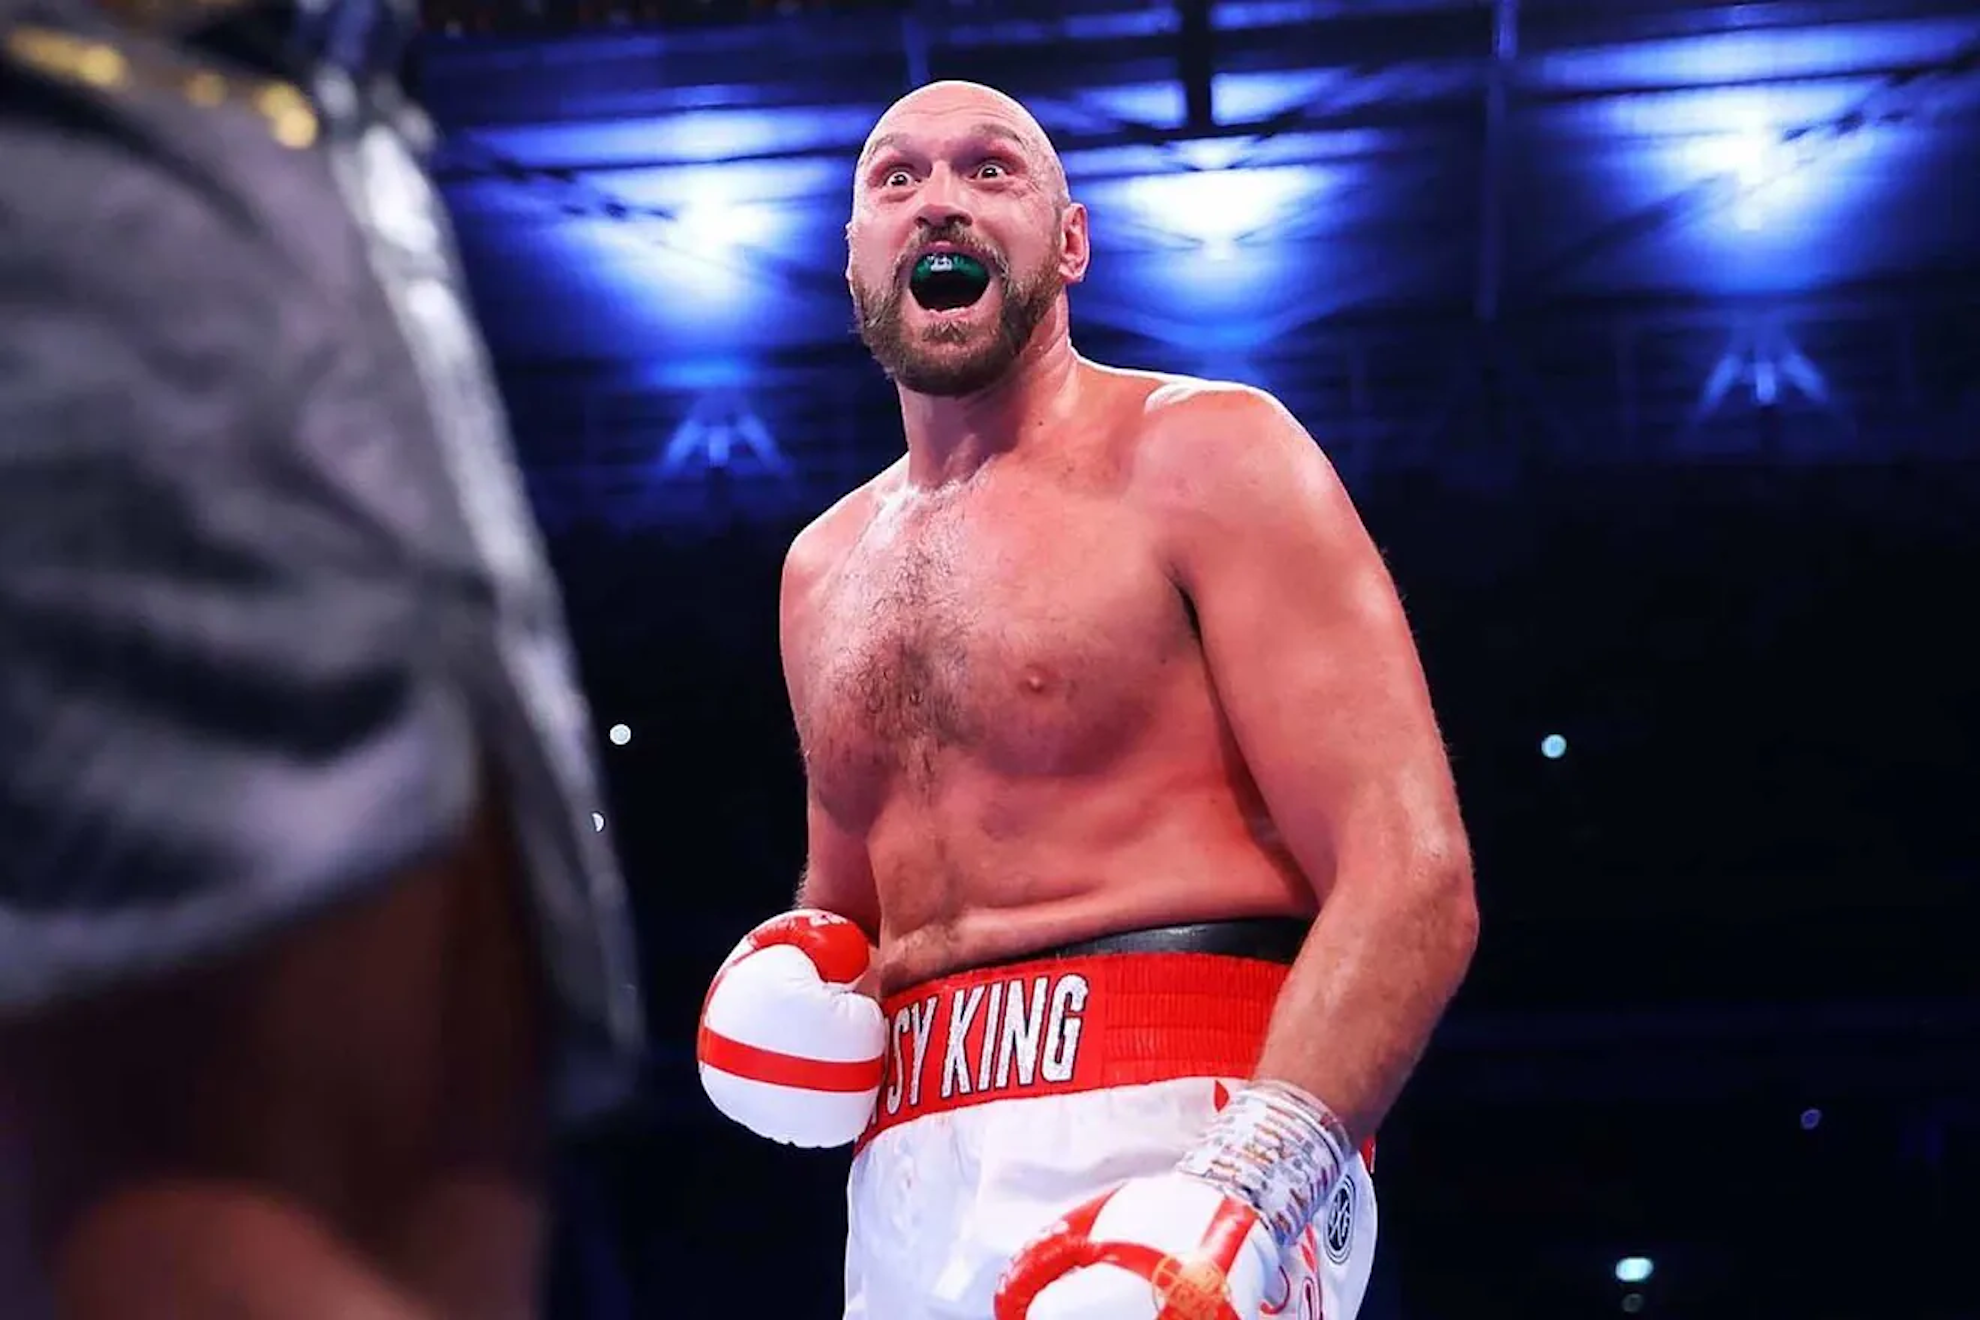 Boxer claims Fury could be disqualified from Usyk fight: The referee will be alerted to this